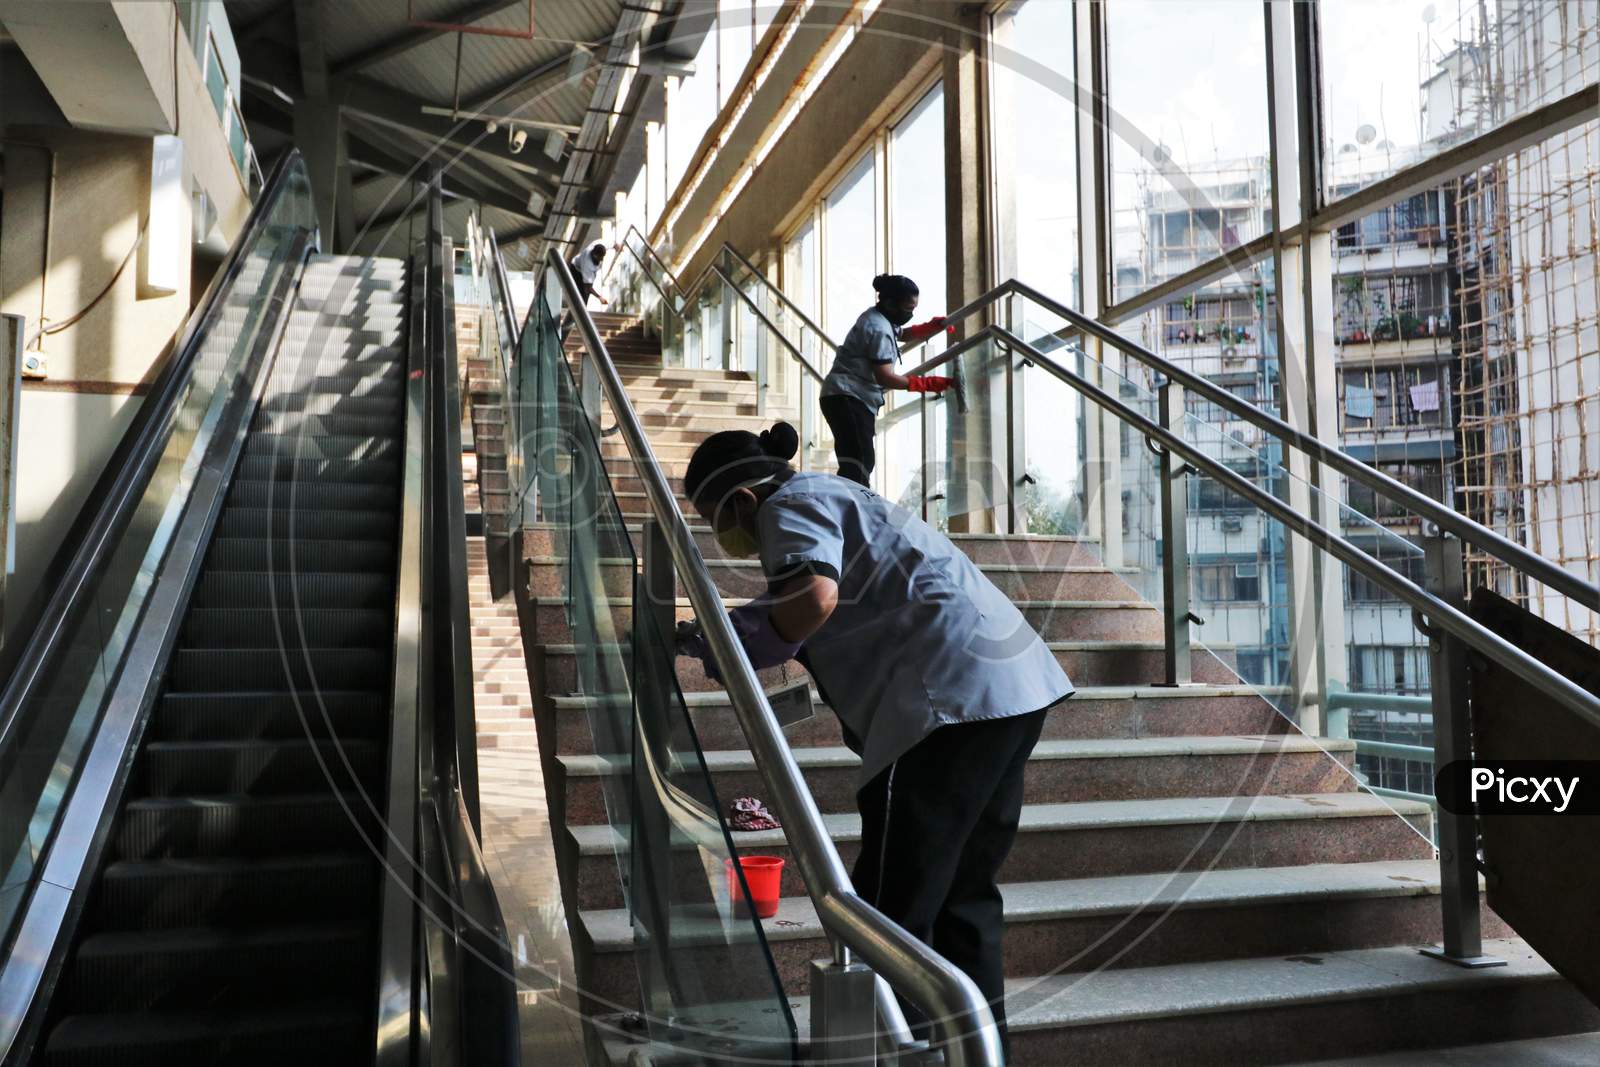 Workers clean a platform as the metro network prepares to resume services after more than a 6-month shutdown due to the Covid-19 coronavirus pandemic, at the Andheri metro station in Mumbai, October, 2020.